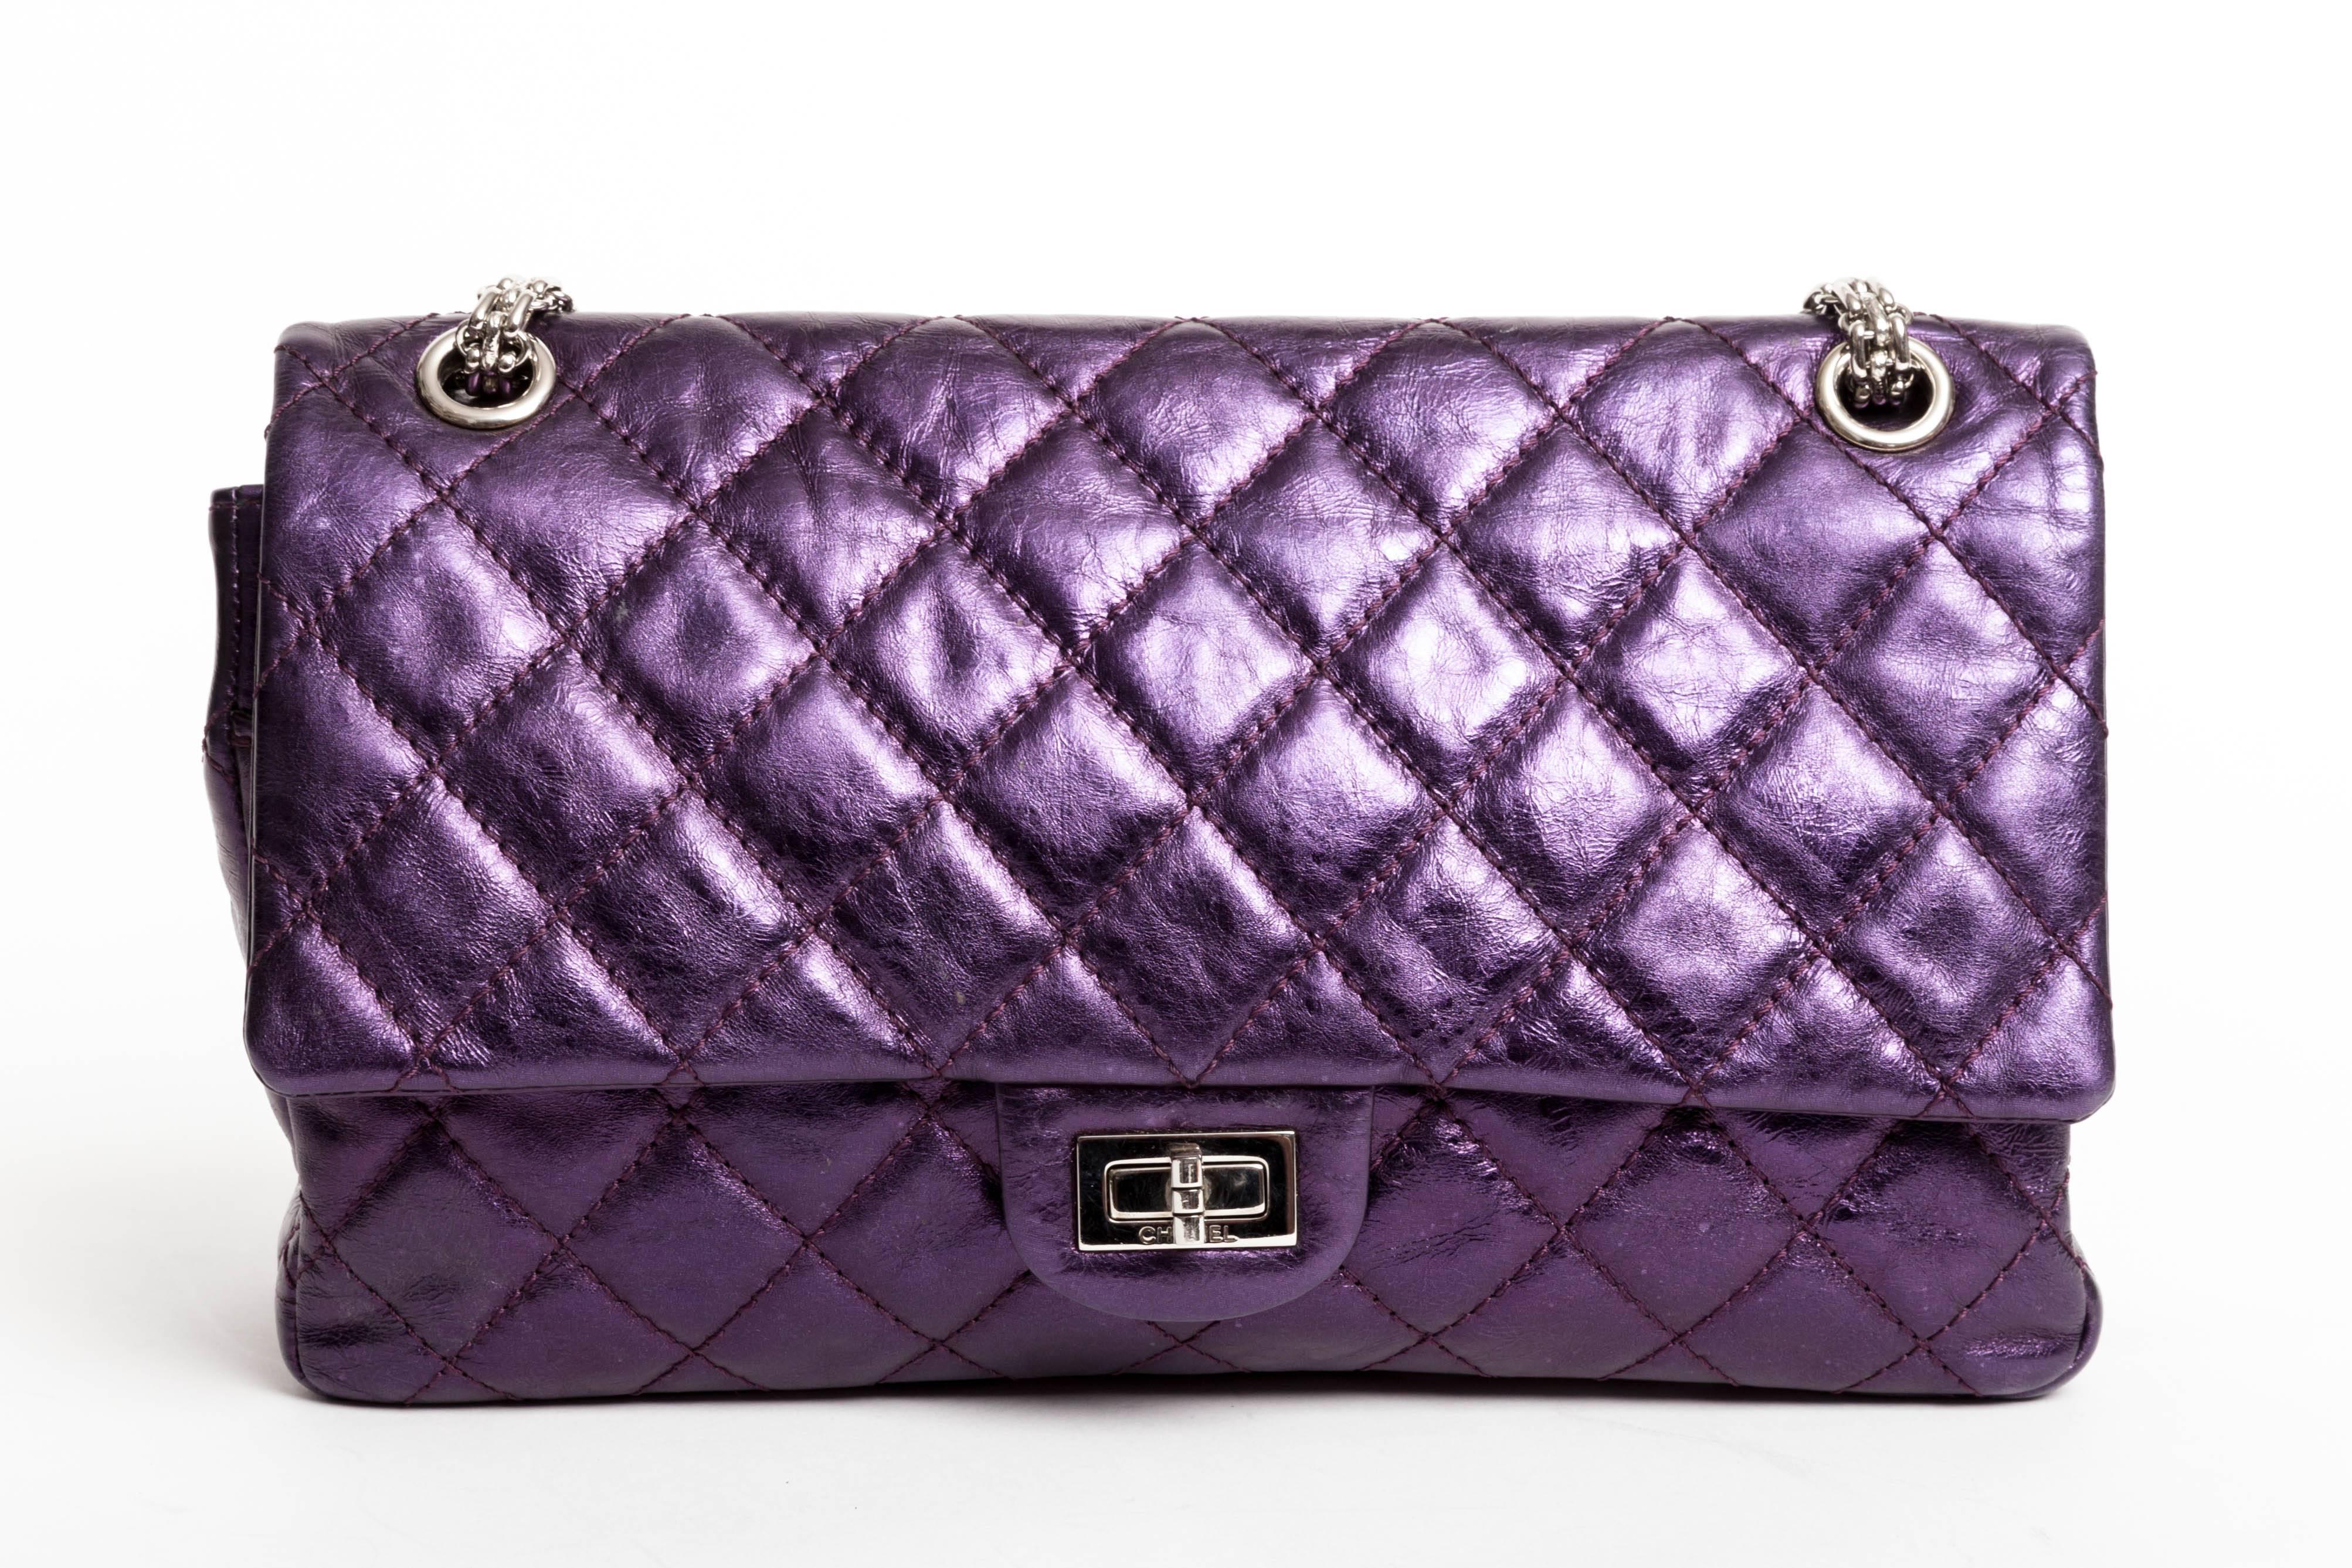 This Chanel Purple Metallic Reissue is in excellent condition.
Authenticity card No 12160656 denotes the years 2008 - 2009
Dust Bag is included.
Features one half moon back pocket as well as a zip pocket to the top flap of the bag. A large pocket